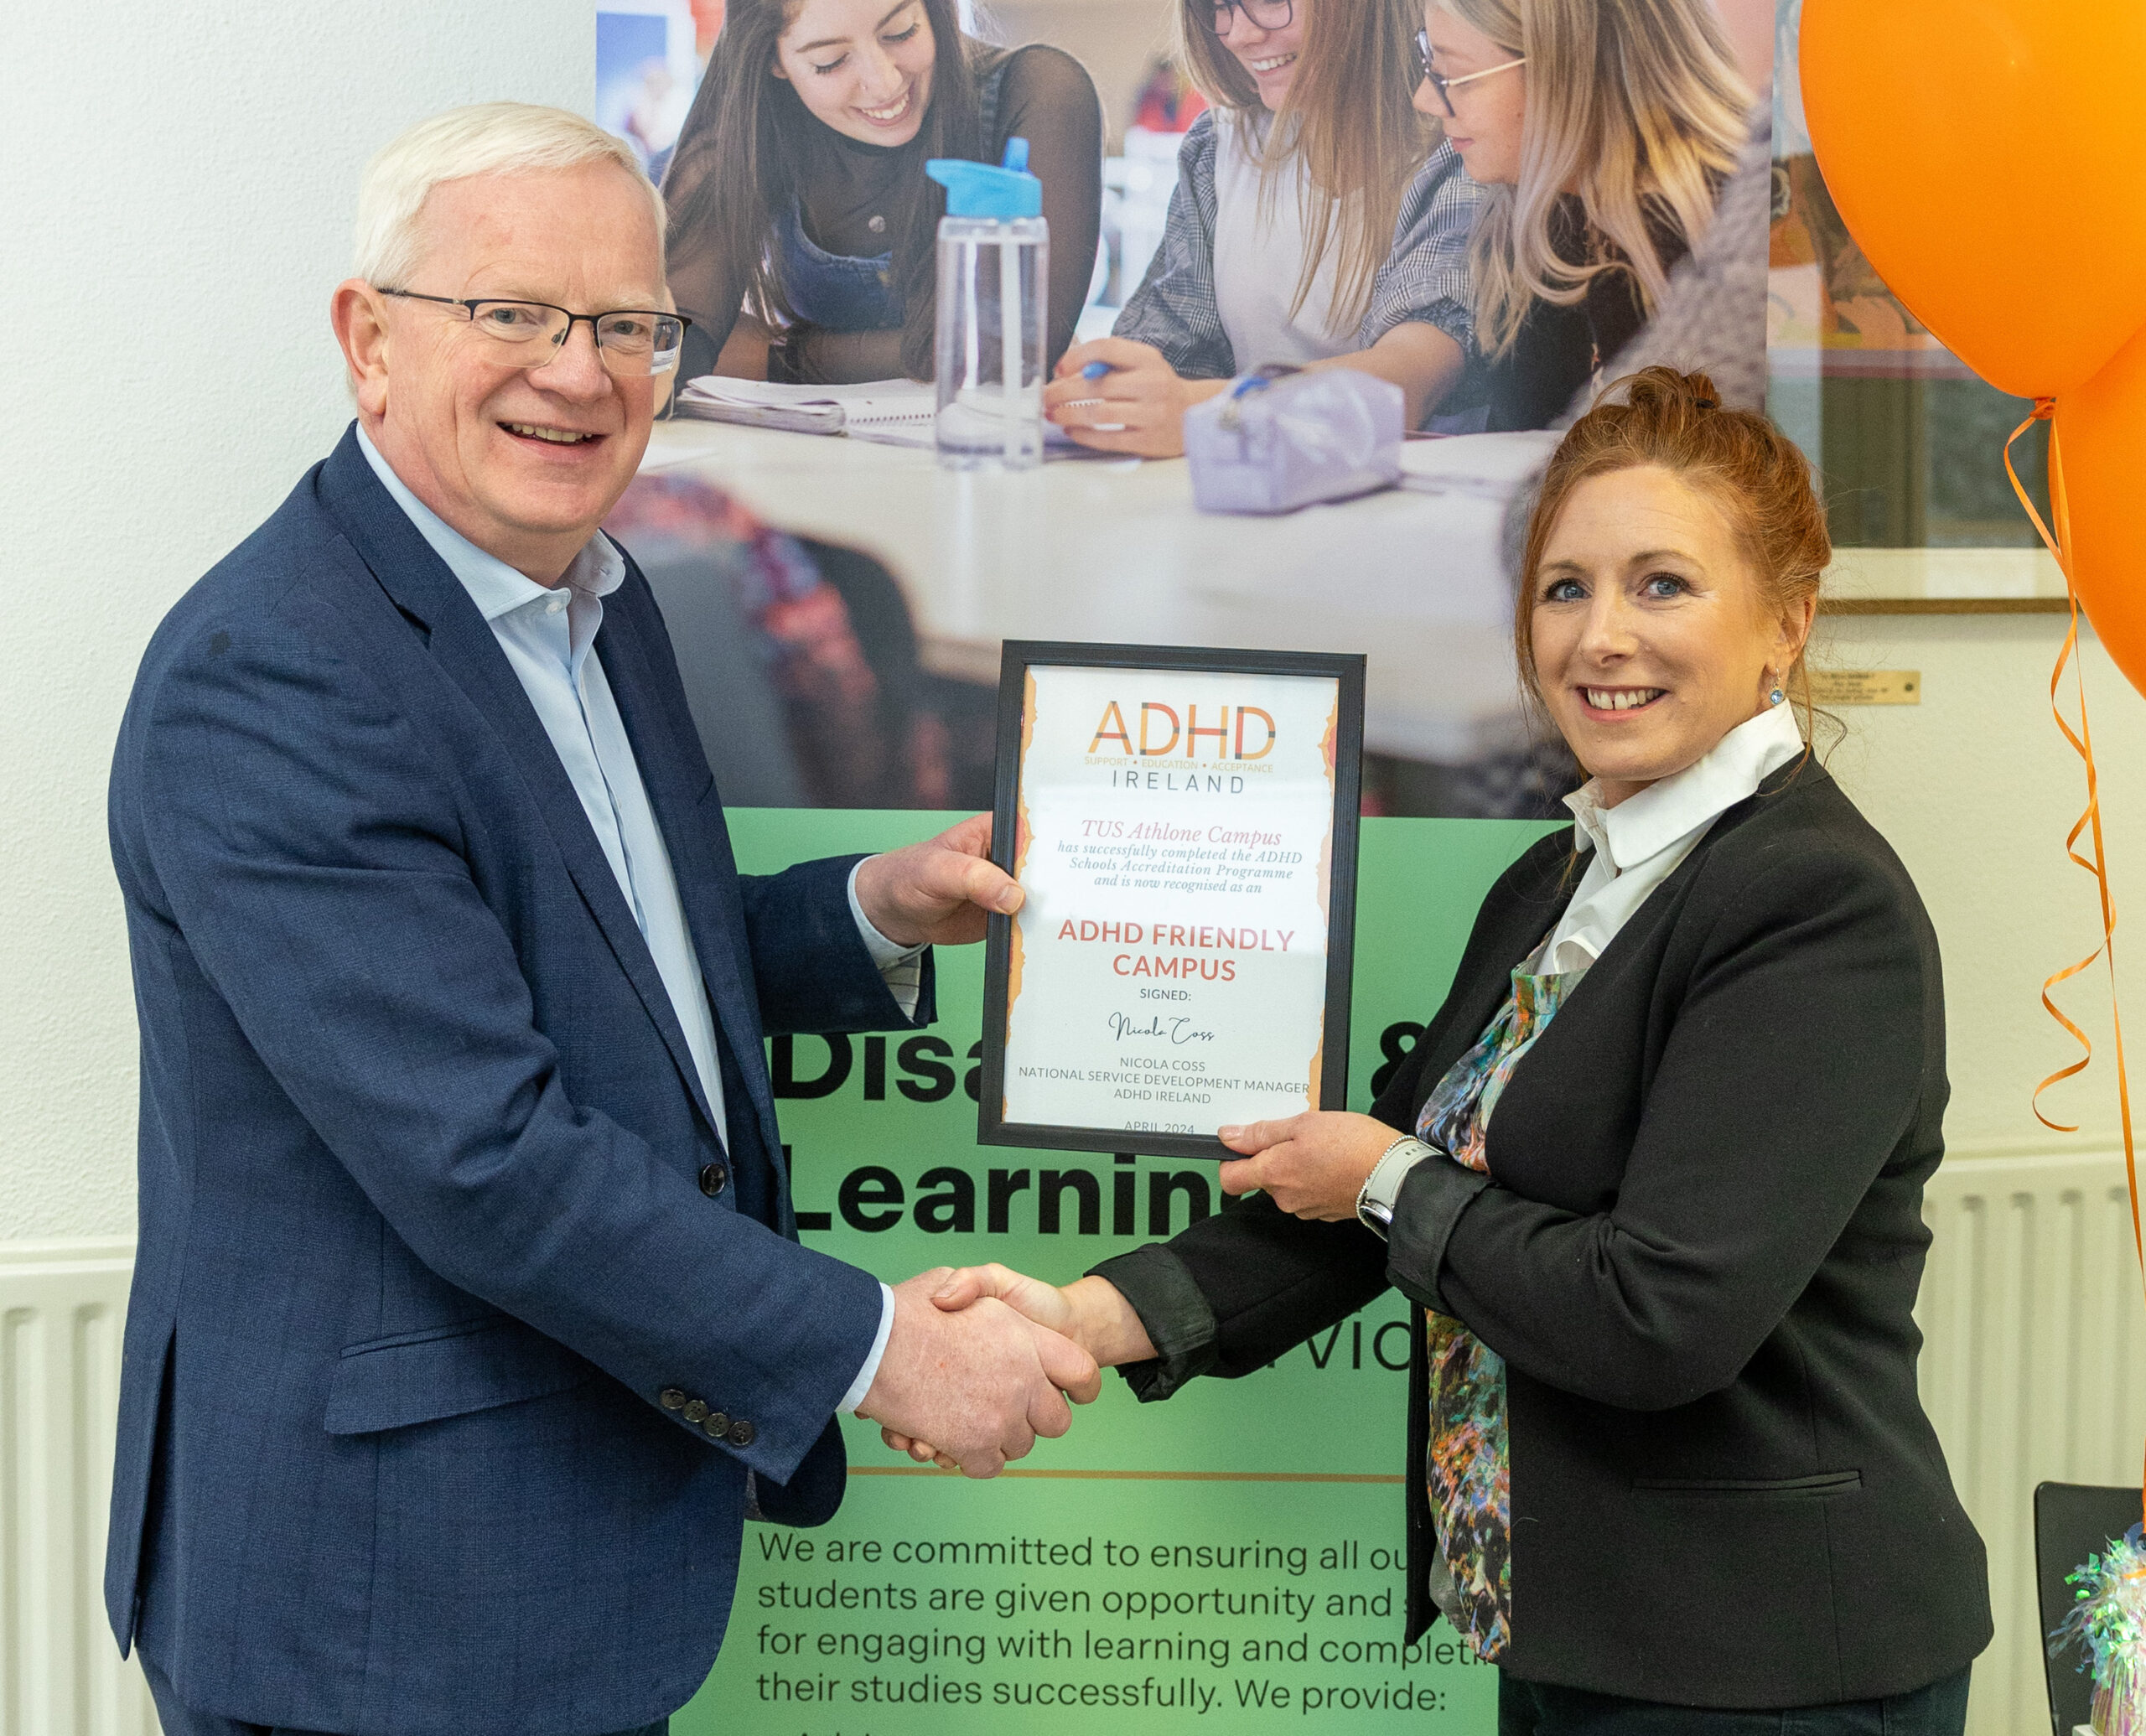 TUS ADHD friendly university - President of TUS Professor Vincent Cunnane with Nicola Coss, National Aervice Development Manager, ADHD Ireland as TUS is designated Ireland’s first ADHD-friendly university. Photo Nathan Cafolla.